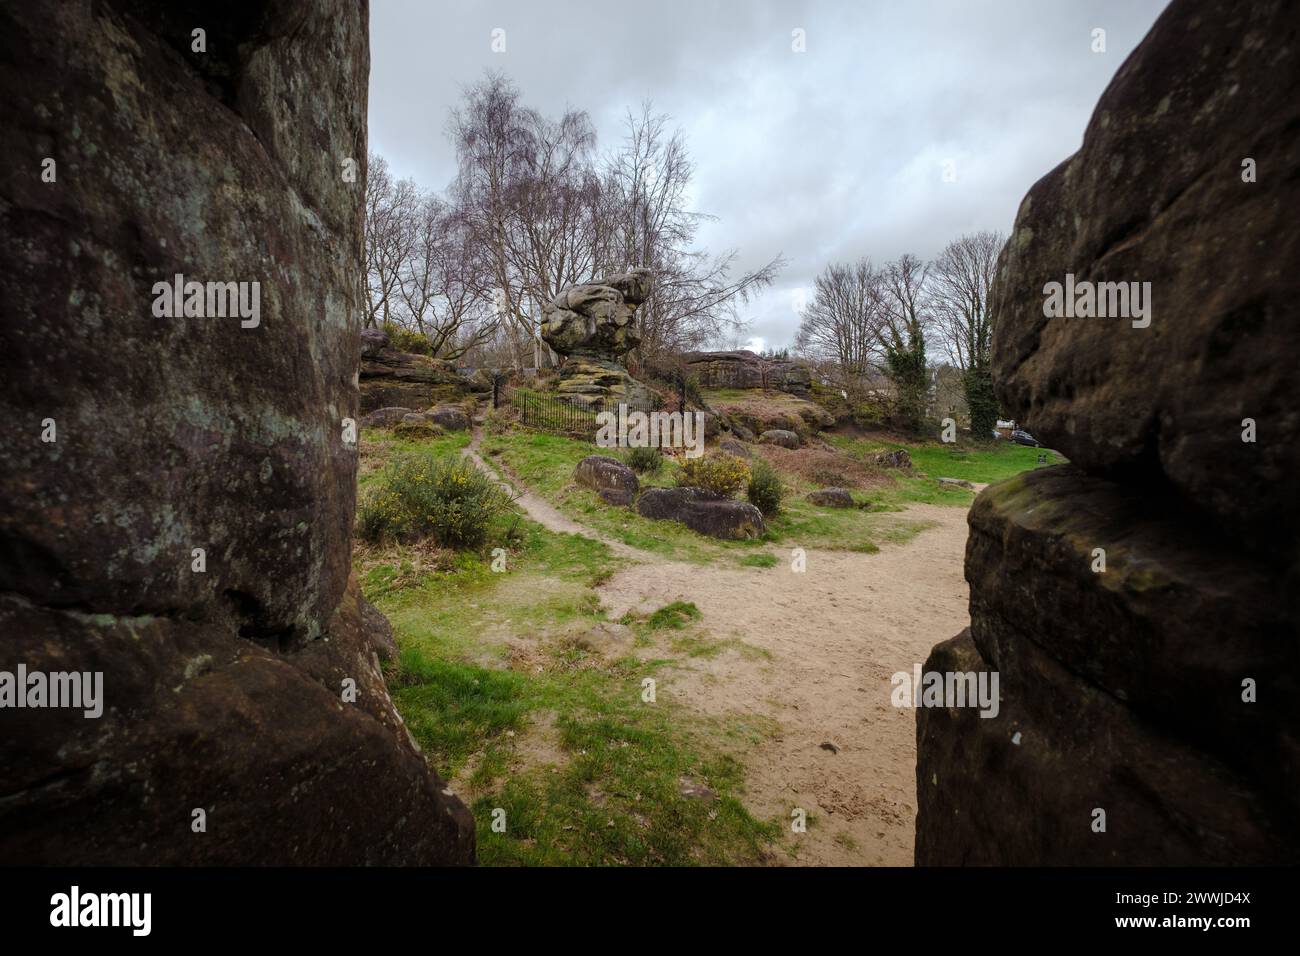 Ancient Sandstone rock formations at Tunbridge Wells Rusthall Common laid down during the ice age and eroded by wind & water into spectacular shapes. Stock Photo